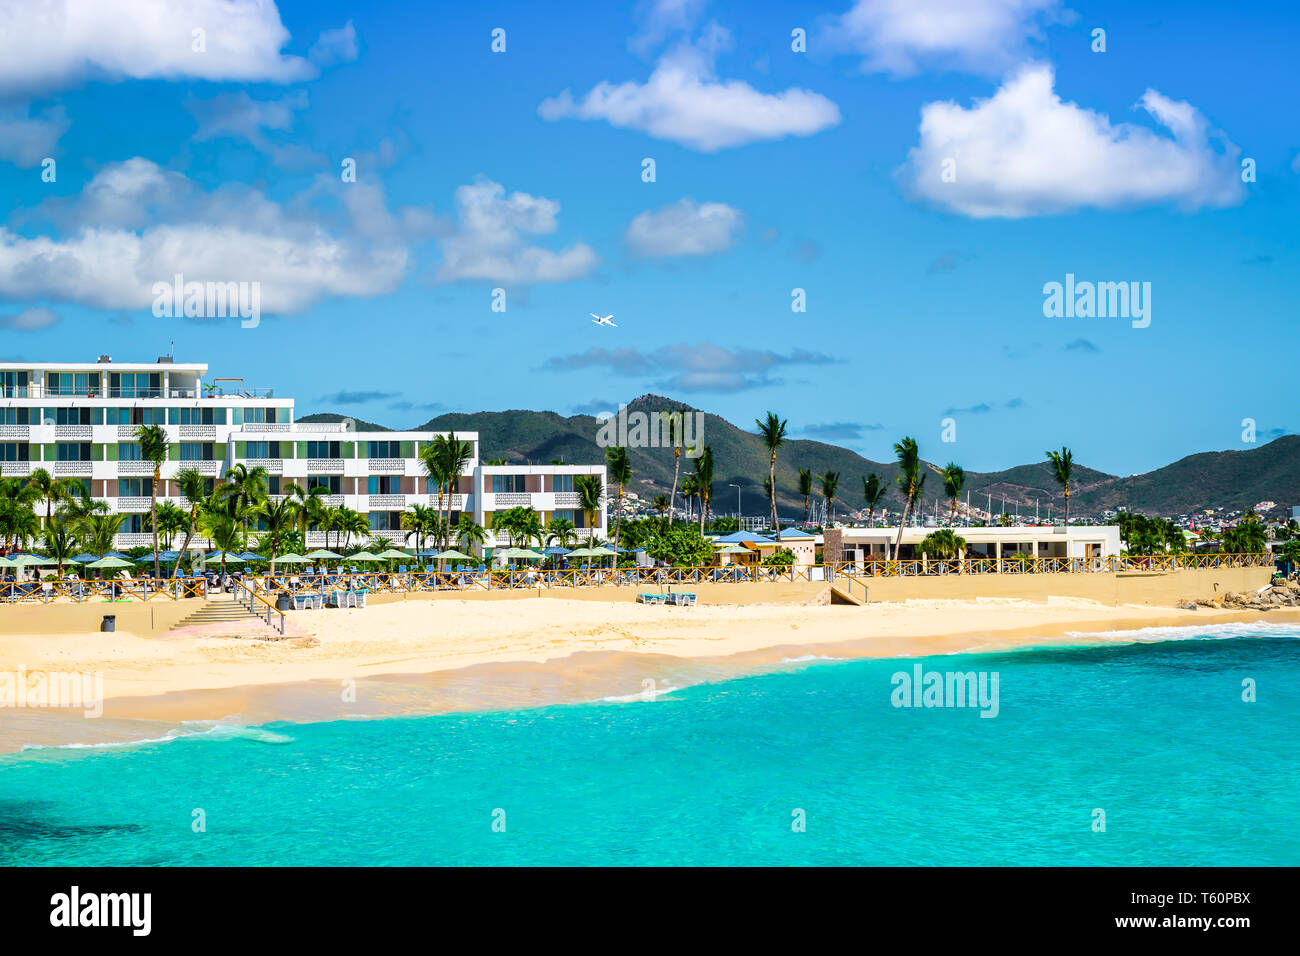 Most popular beach for tourists who come to watch aircraft landing at the airport behind the beautiful white sand beach of Maho Beach, Philipsburg, St Stock Photo